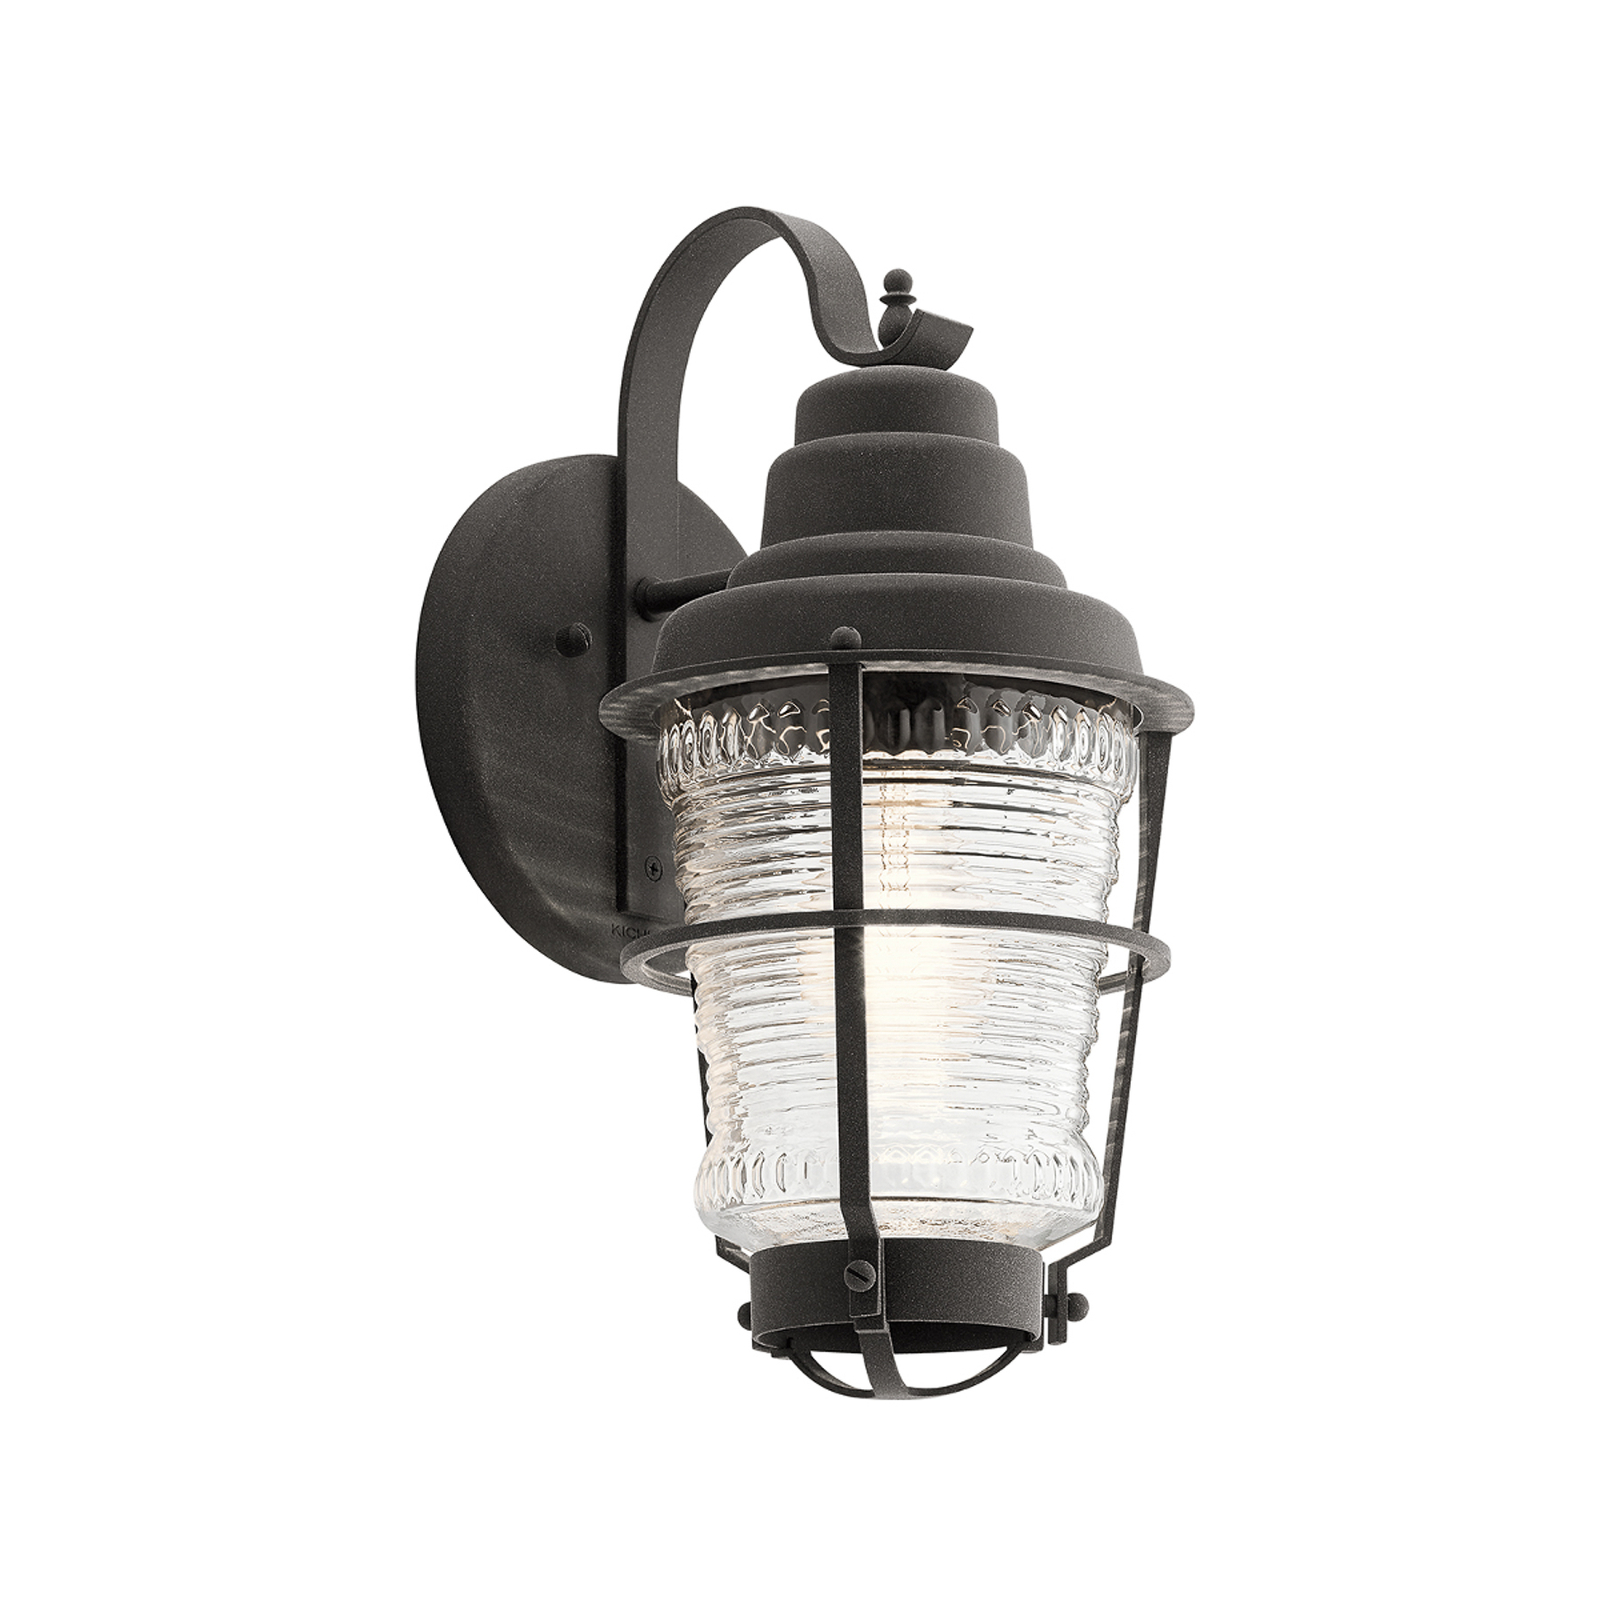 Chance Harbour outdoor wall lamp